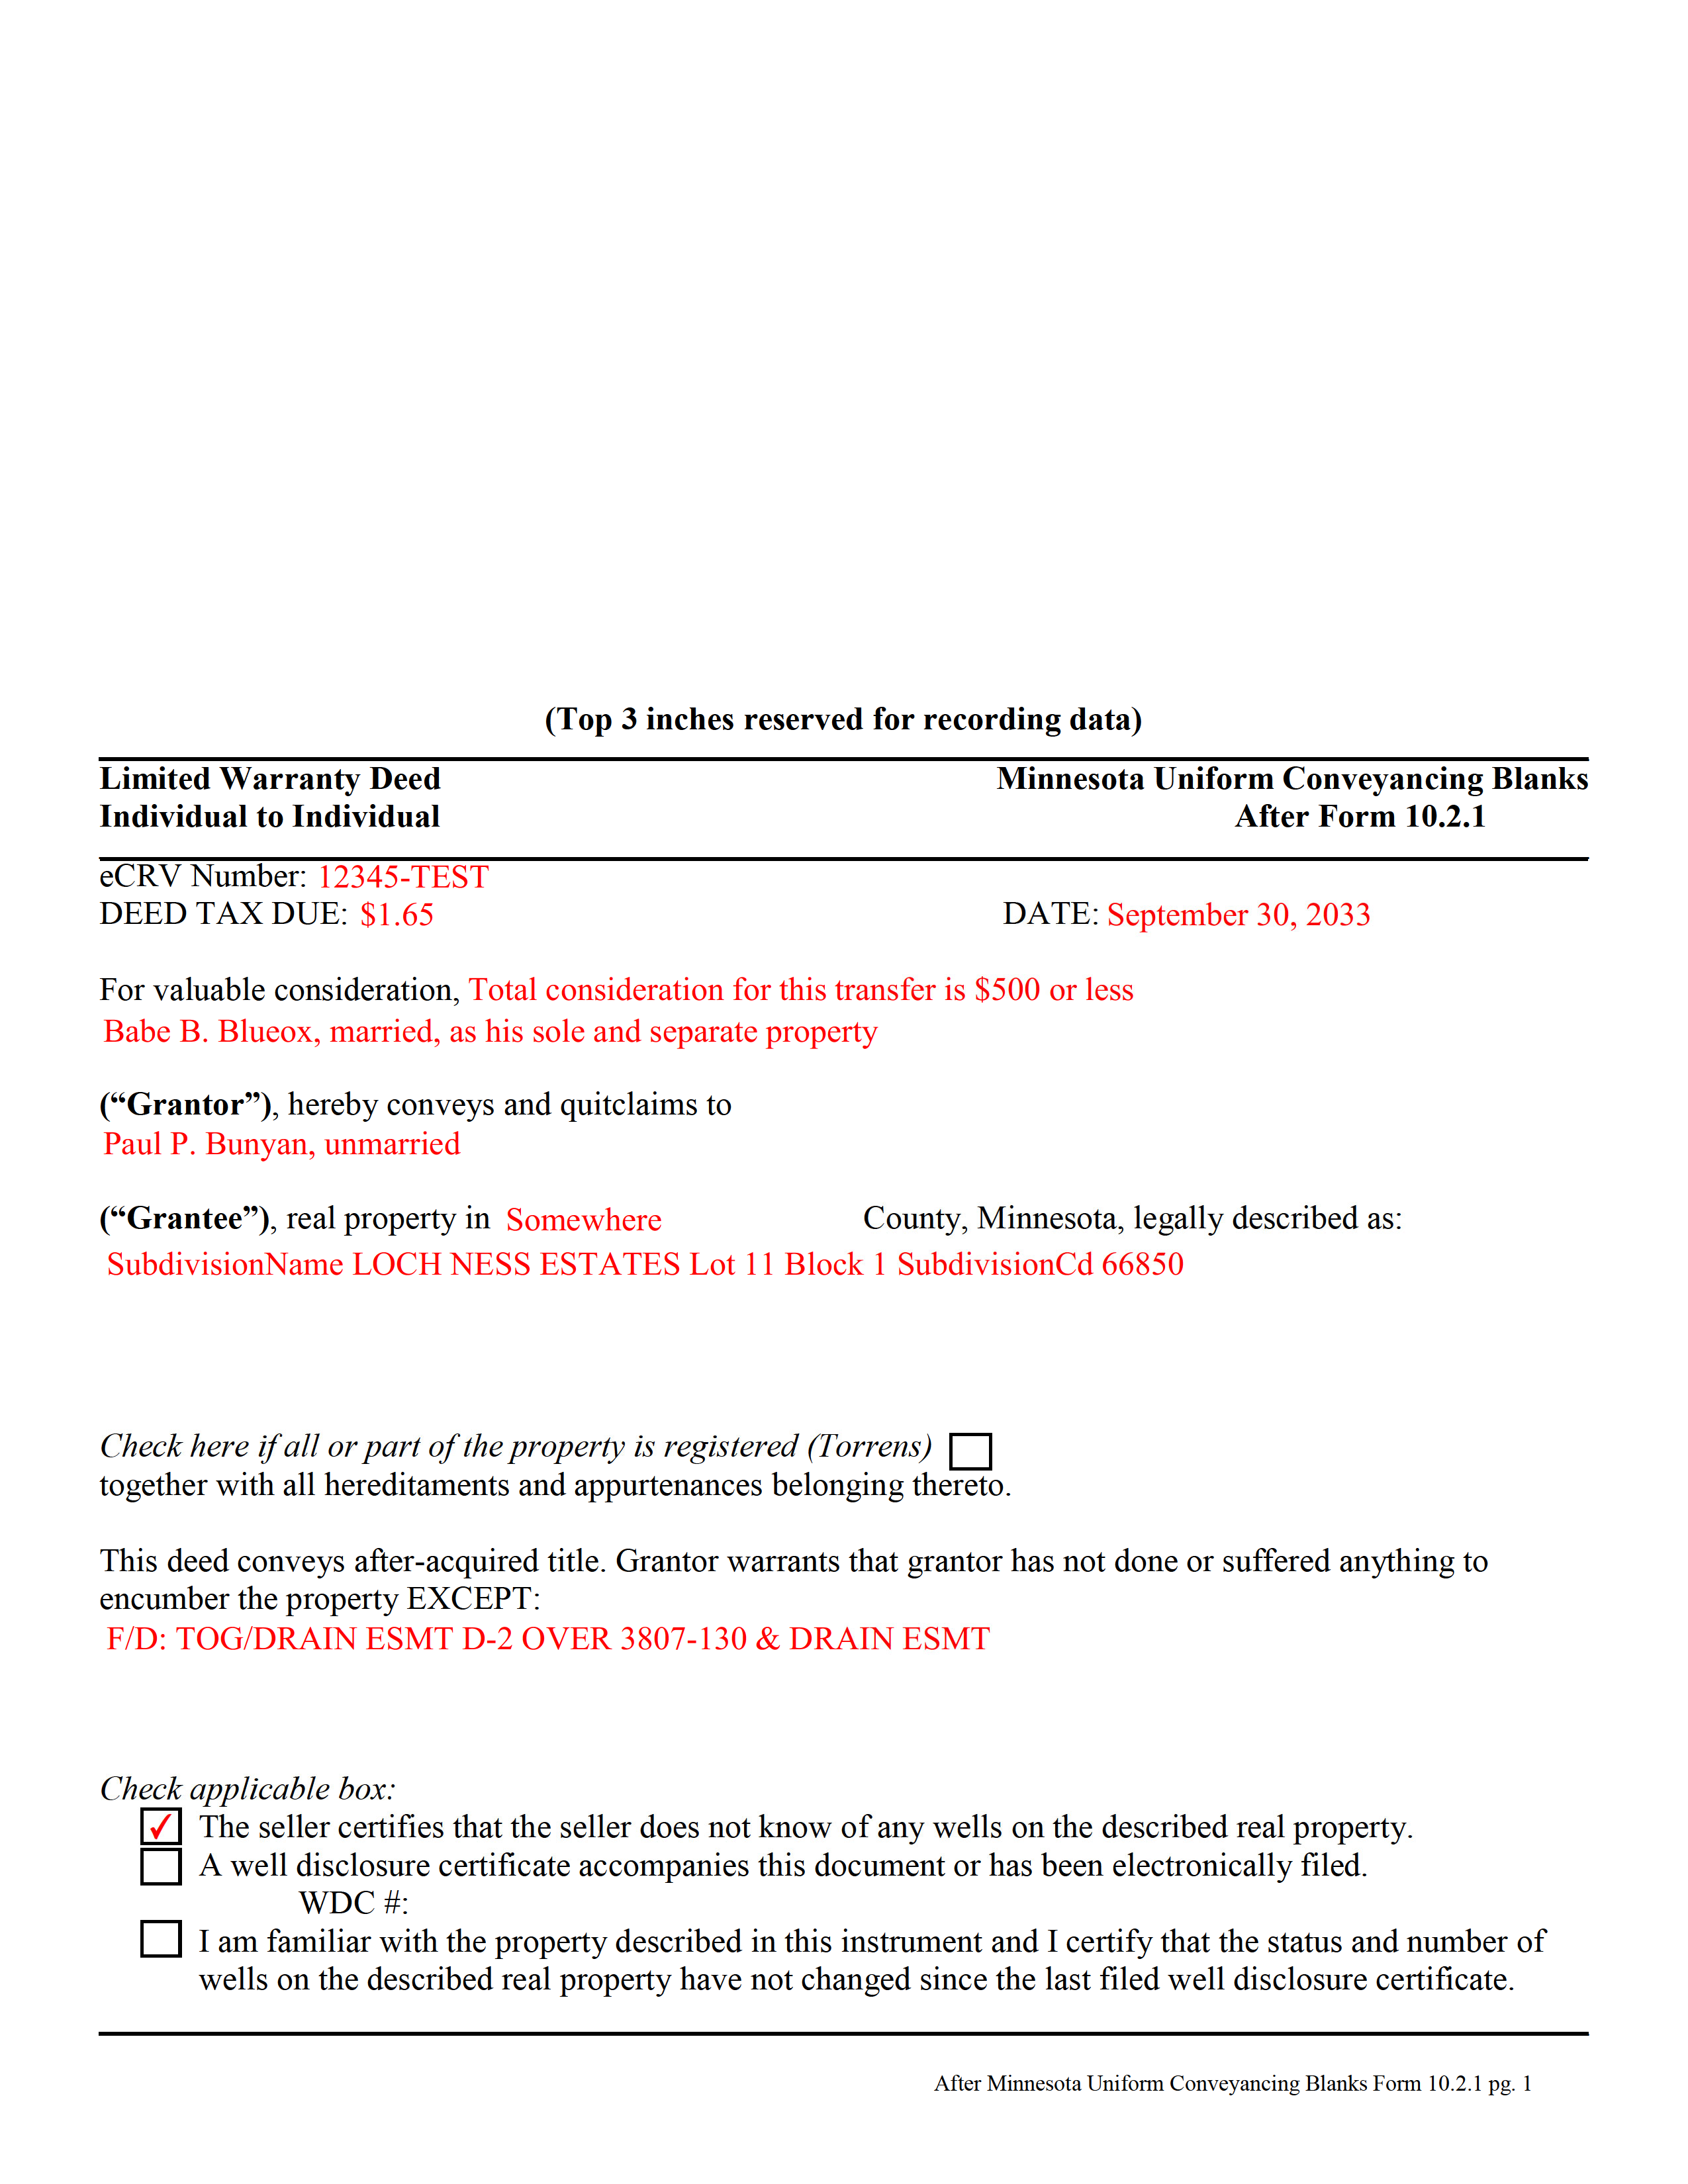 Completed Example of the Limited Warranty Deed Document